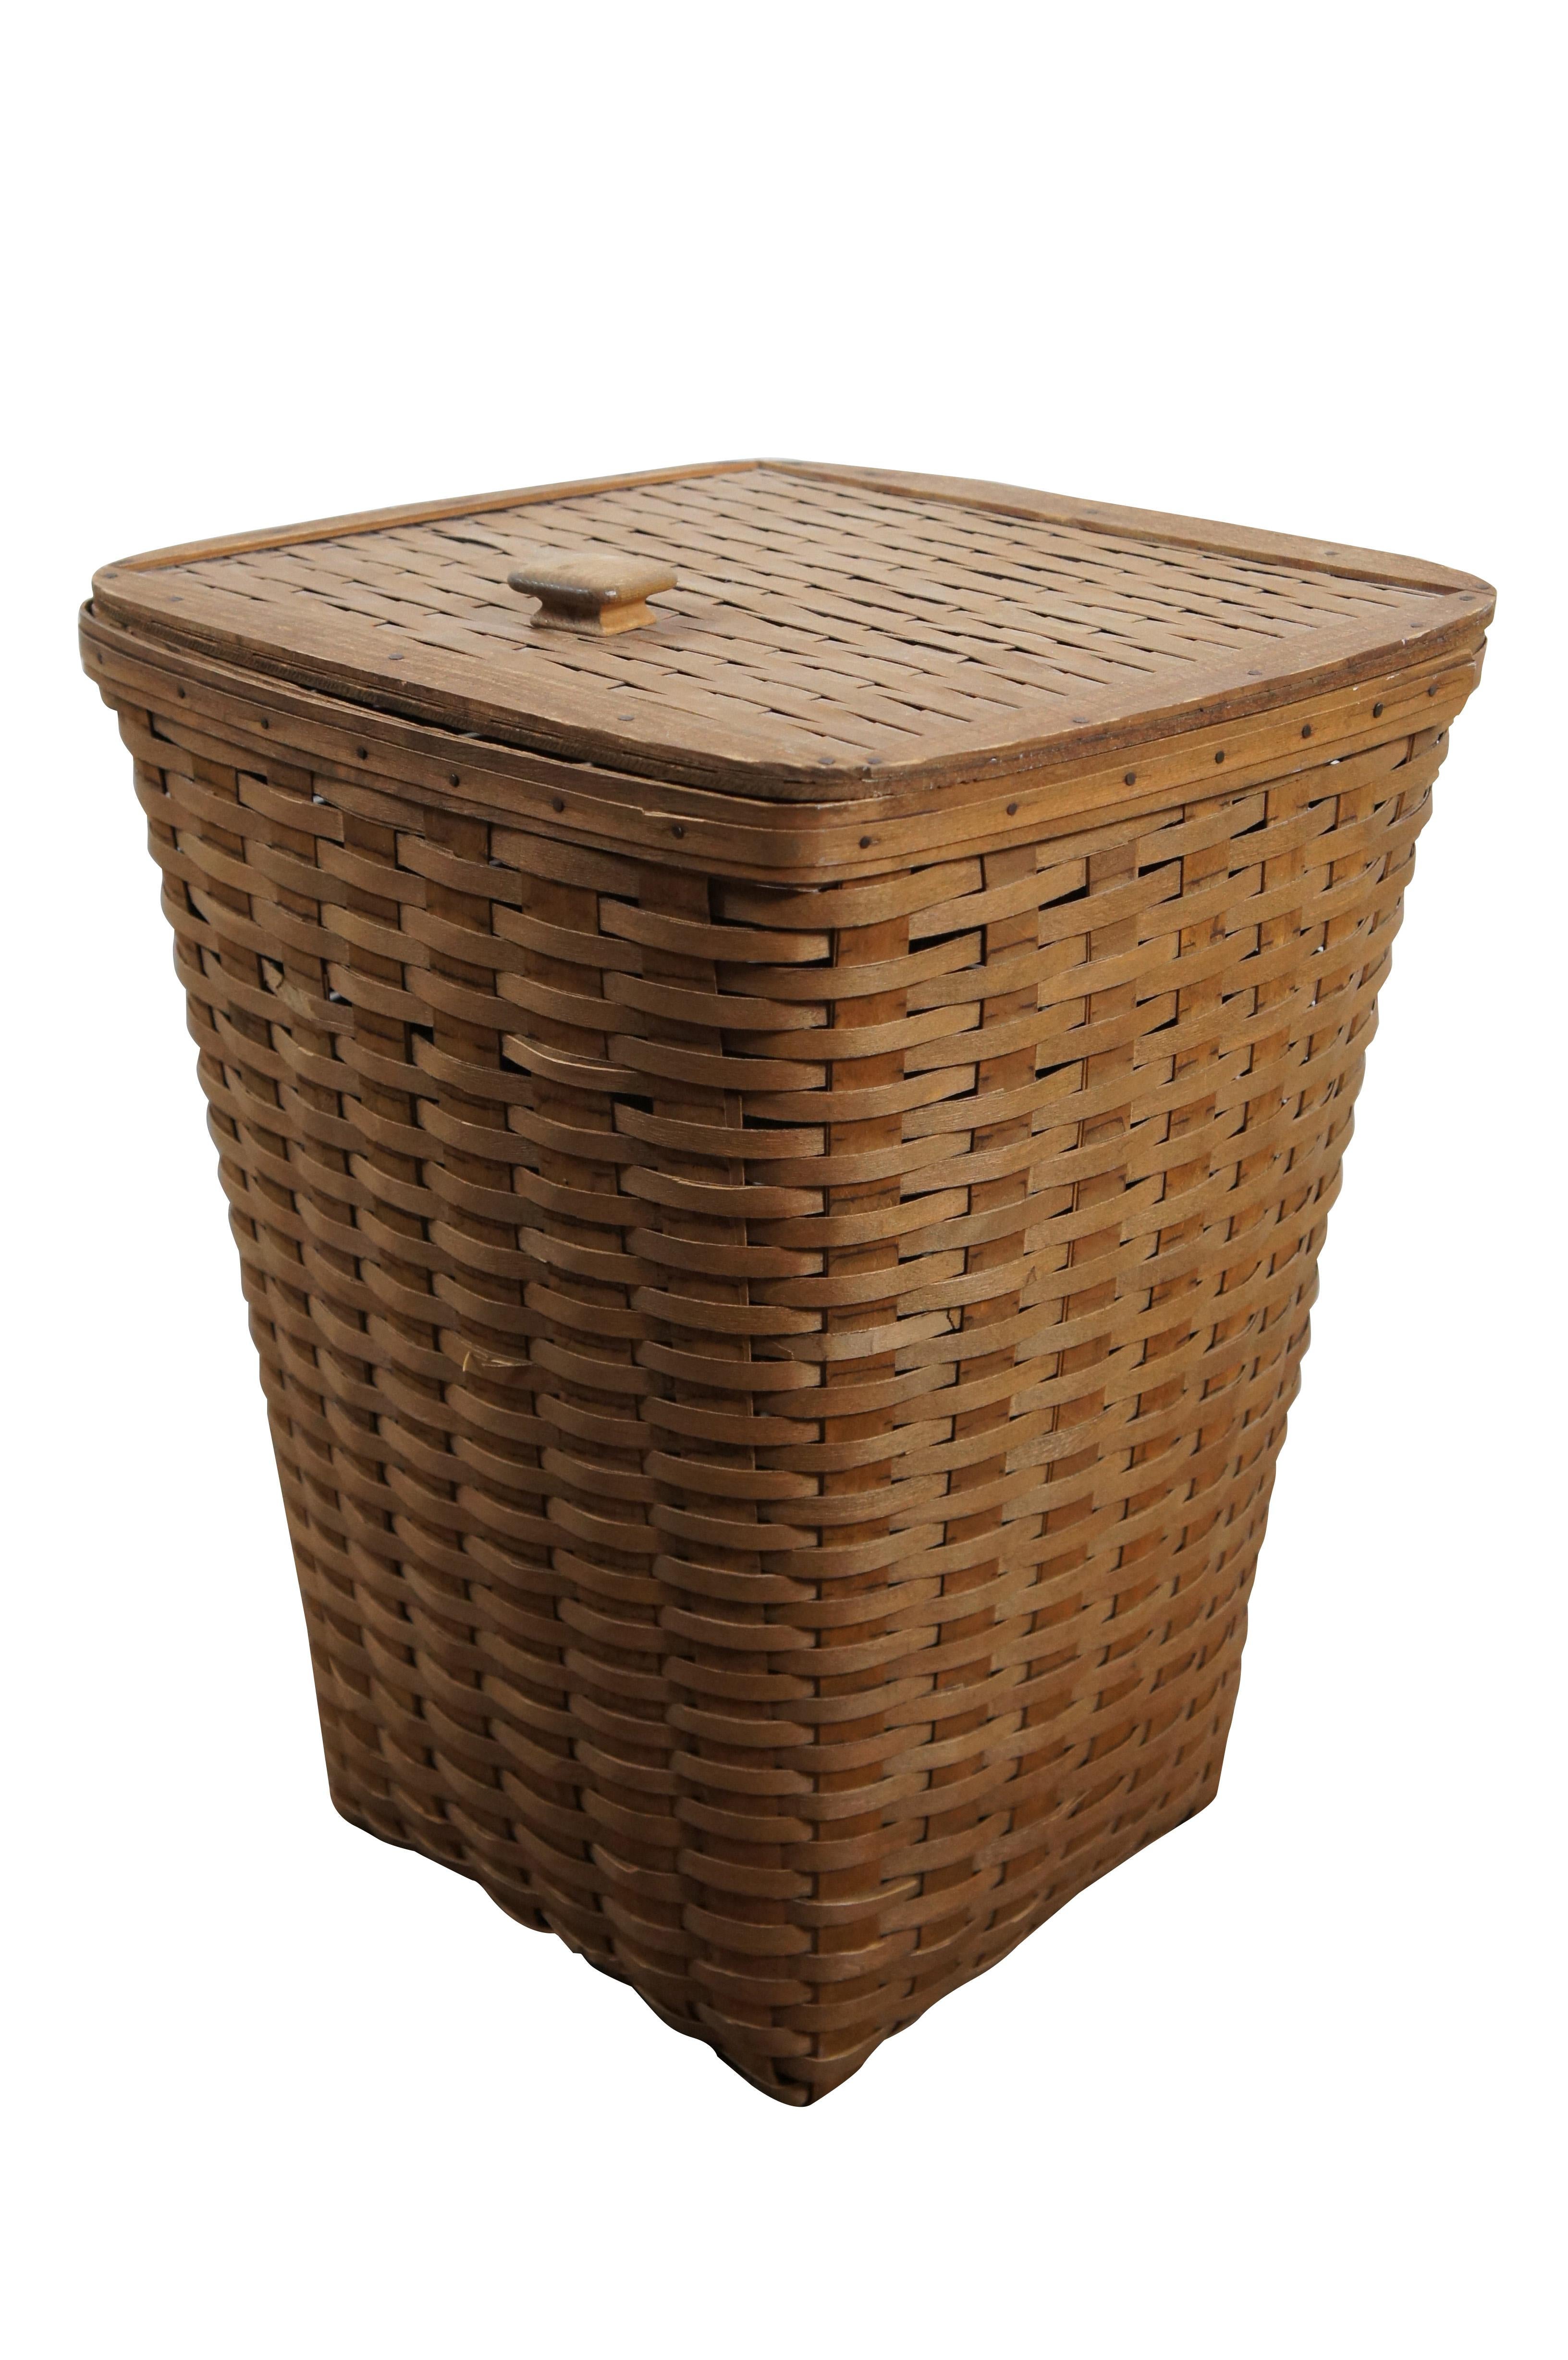 Vintage 1983 Longaberger hand woven maple laundry basket / clothes hamper / trash can featuring a square form with tapered base and lid with square handle attached with leather strap hinges. Signed SAC 83.

“The Longaberger Company was an American